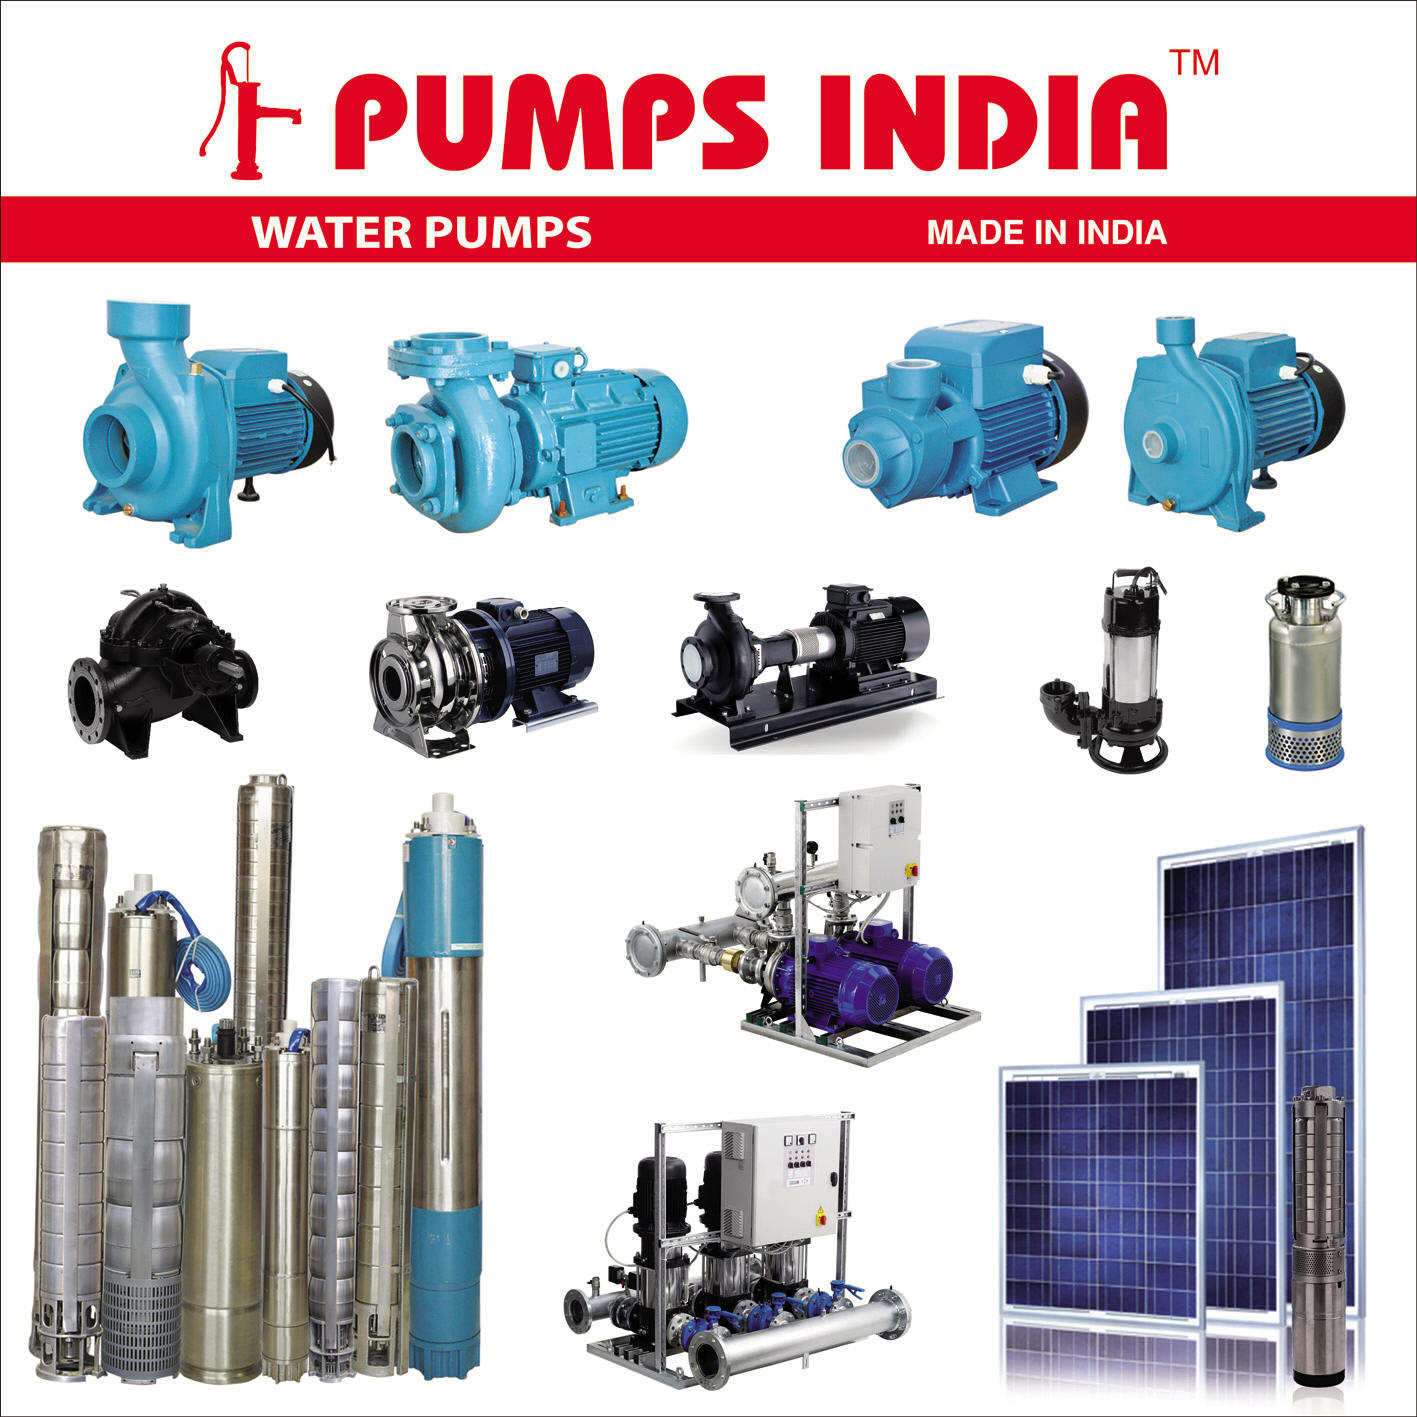 Pumps India Products